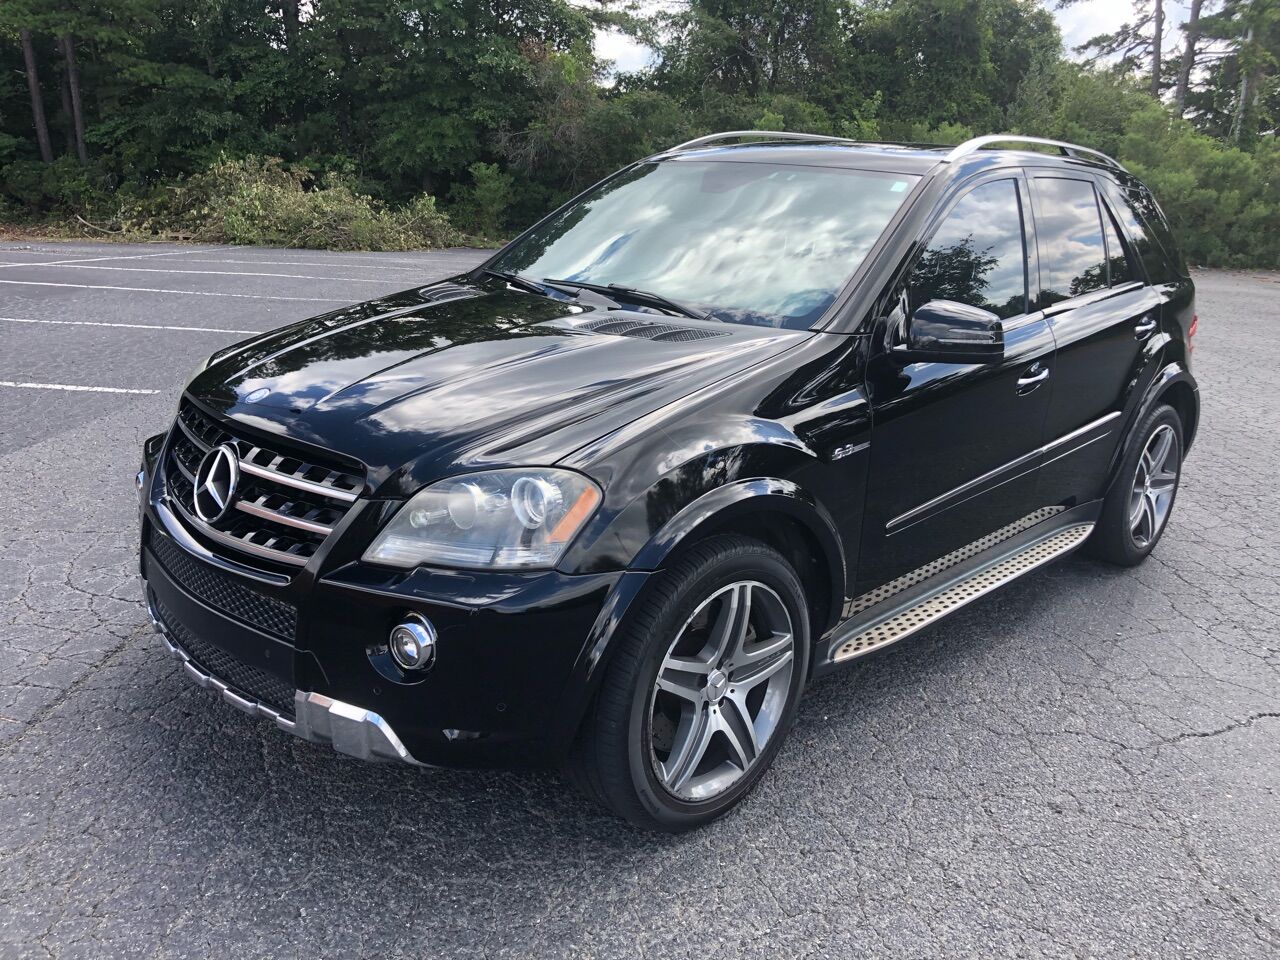 2011 Mercedes-Benz M-Class For Sale In Charlotte, NC - Carsforsale.com®